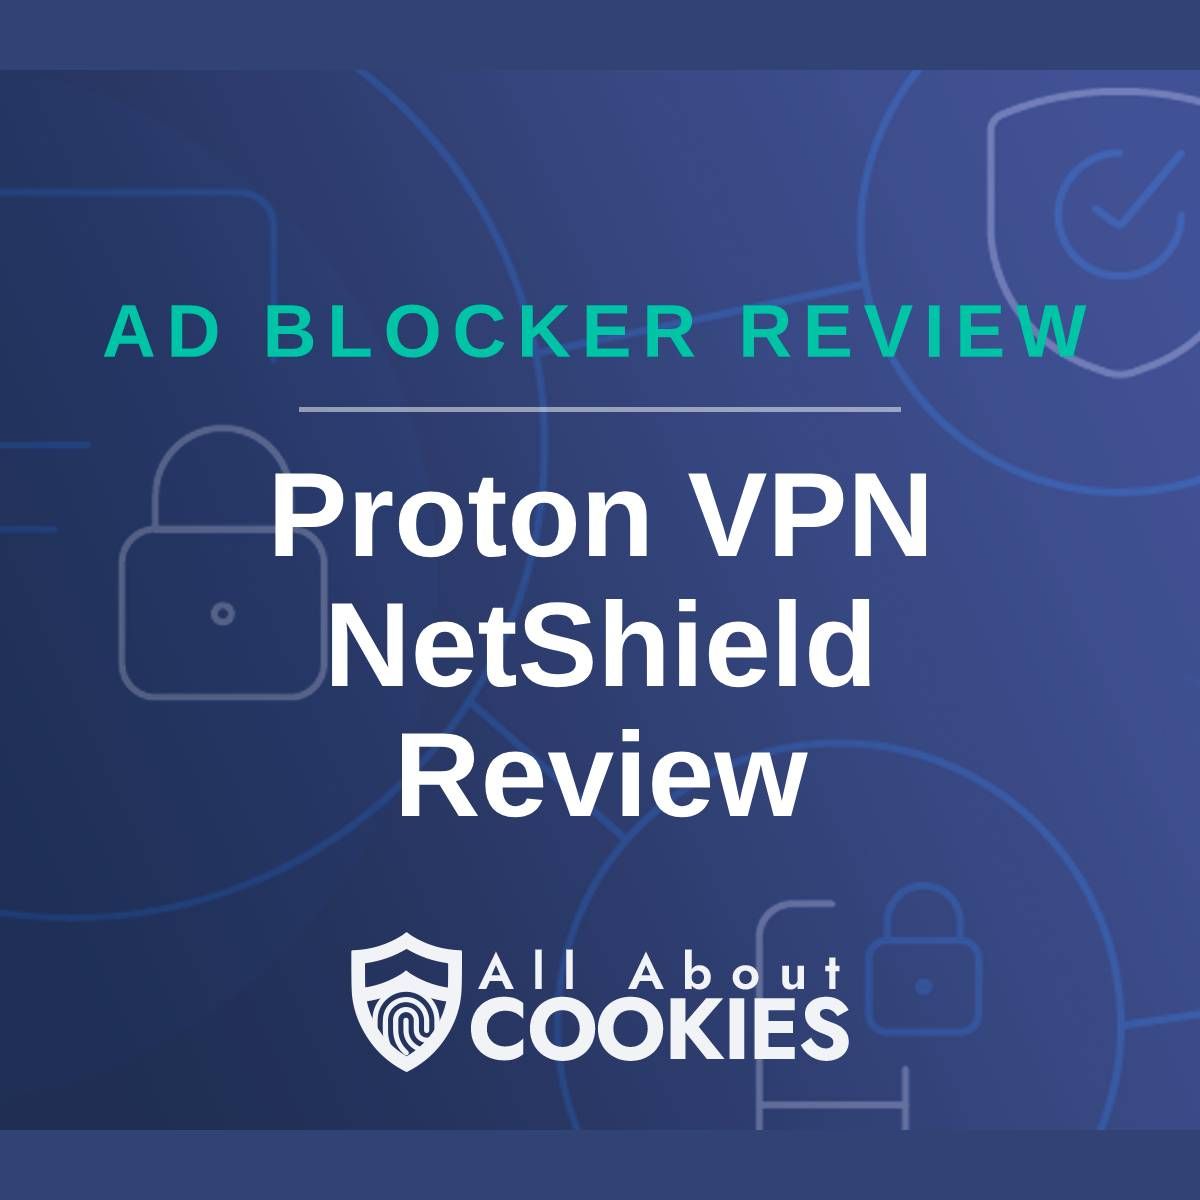 A blue background with images of locks and shields with the text &quot;Ad Blocker Review Proton VPN NetShield Review&quot; and the All About Cookies logo. 